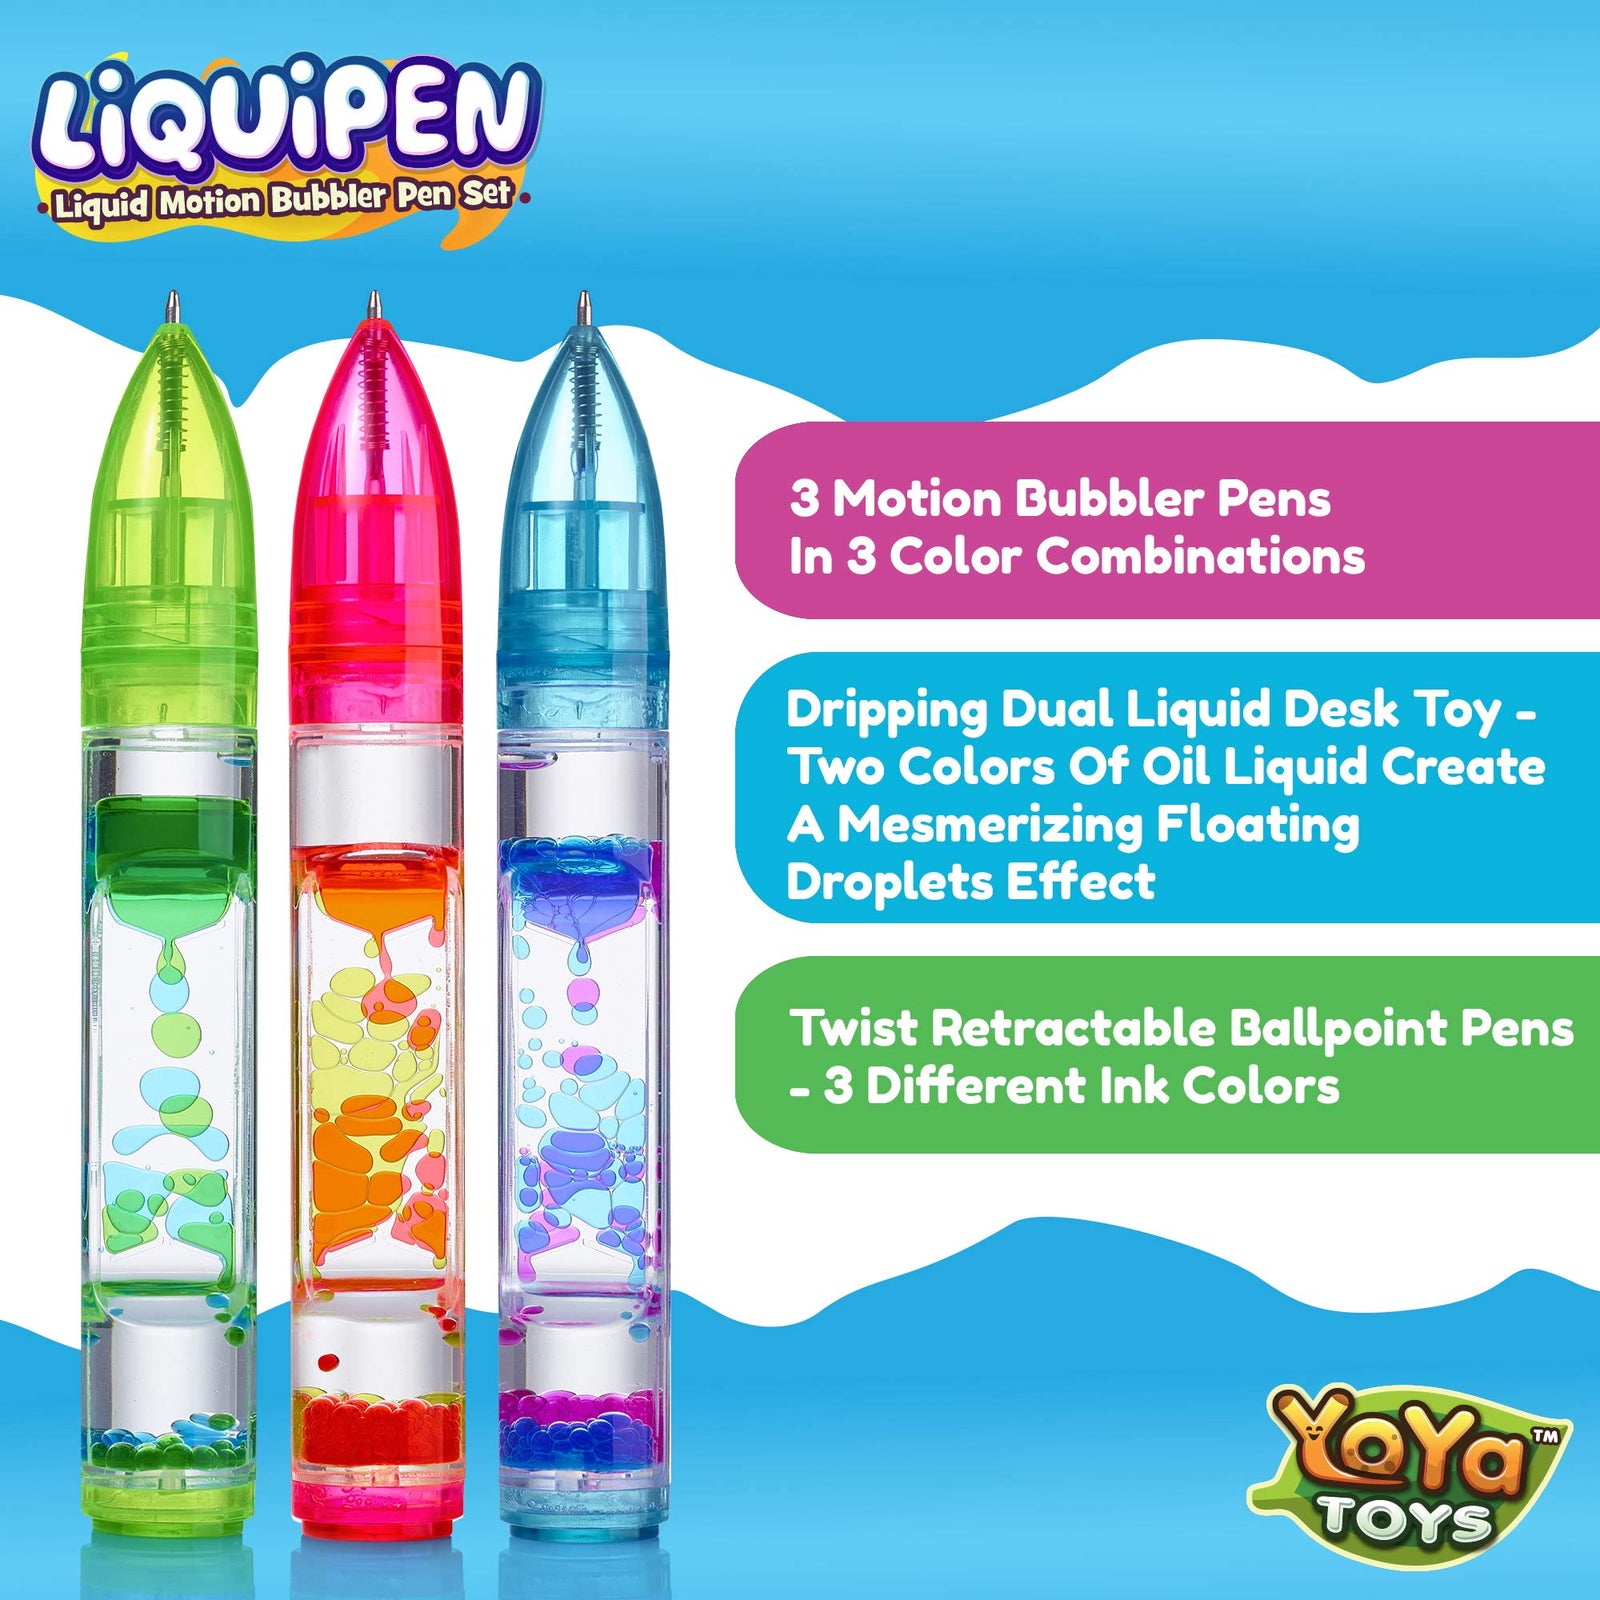 YoYa Toys Liquipen - Liquid Motion Bubbler Pens Sensory Toy (3 Pack) - Writes Like a Regular Pen - Colorful Liquid Timer Pens Great for Stress and Anxiety Relief - Cool Fidget Toys for Kids and Adults